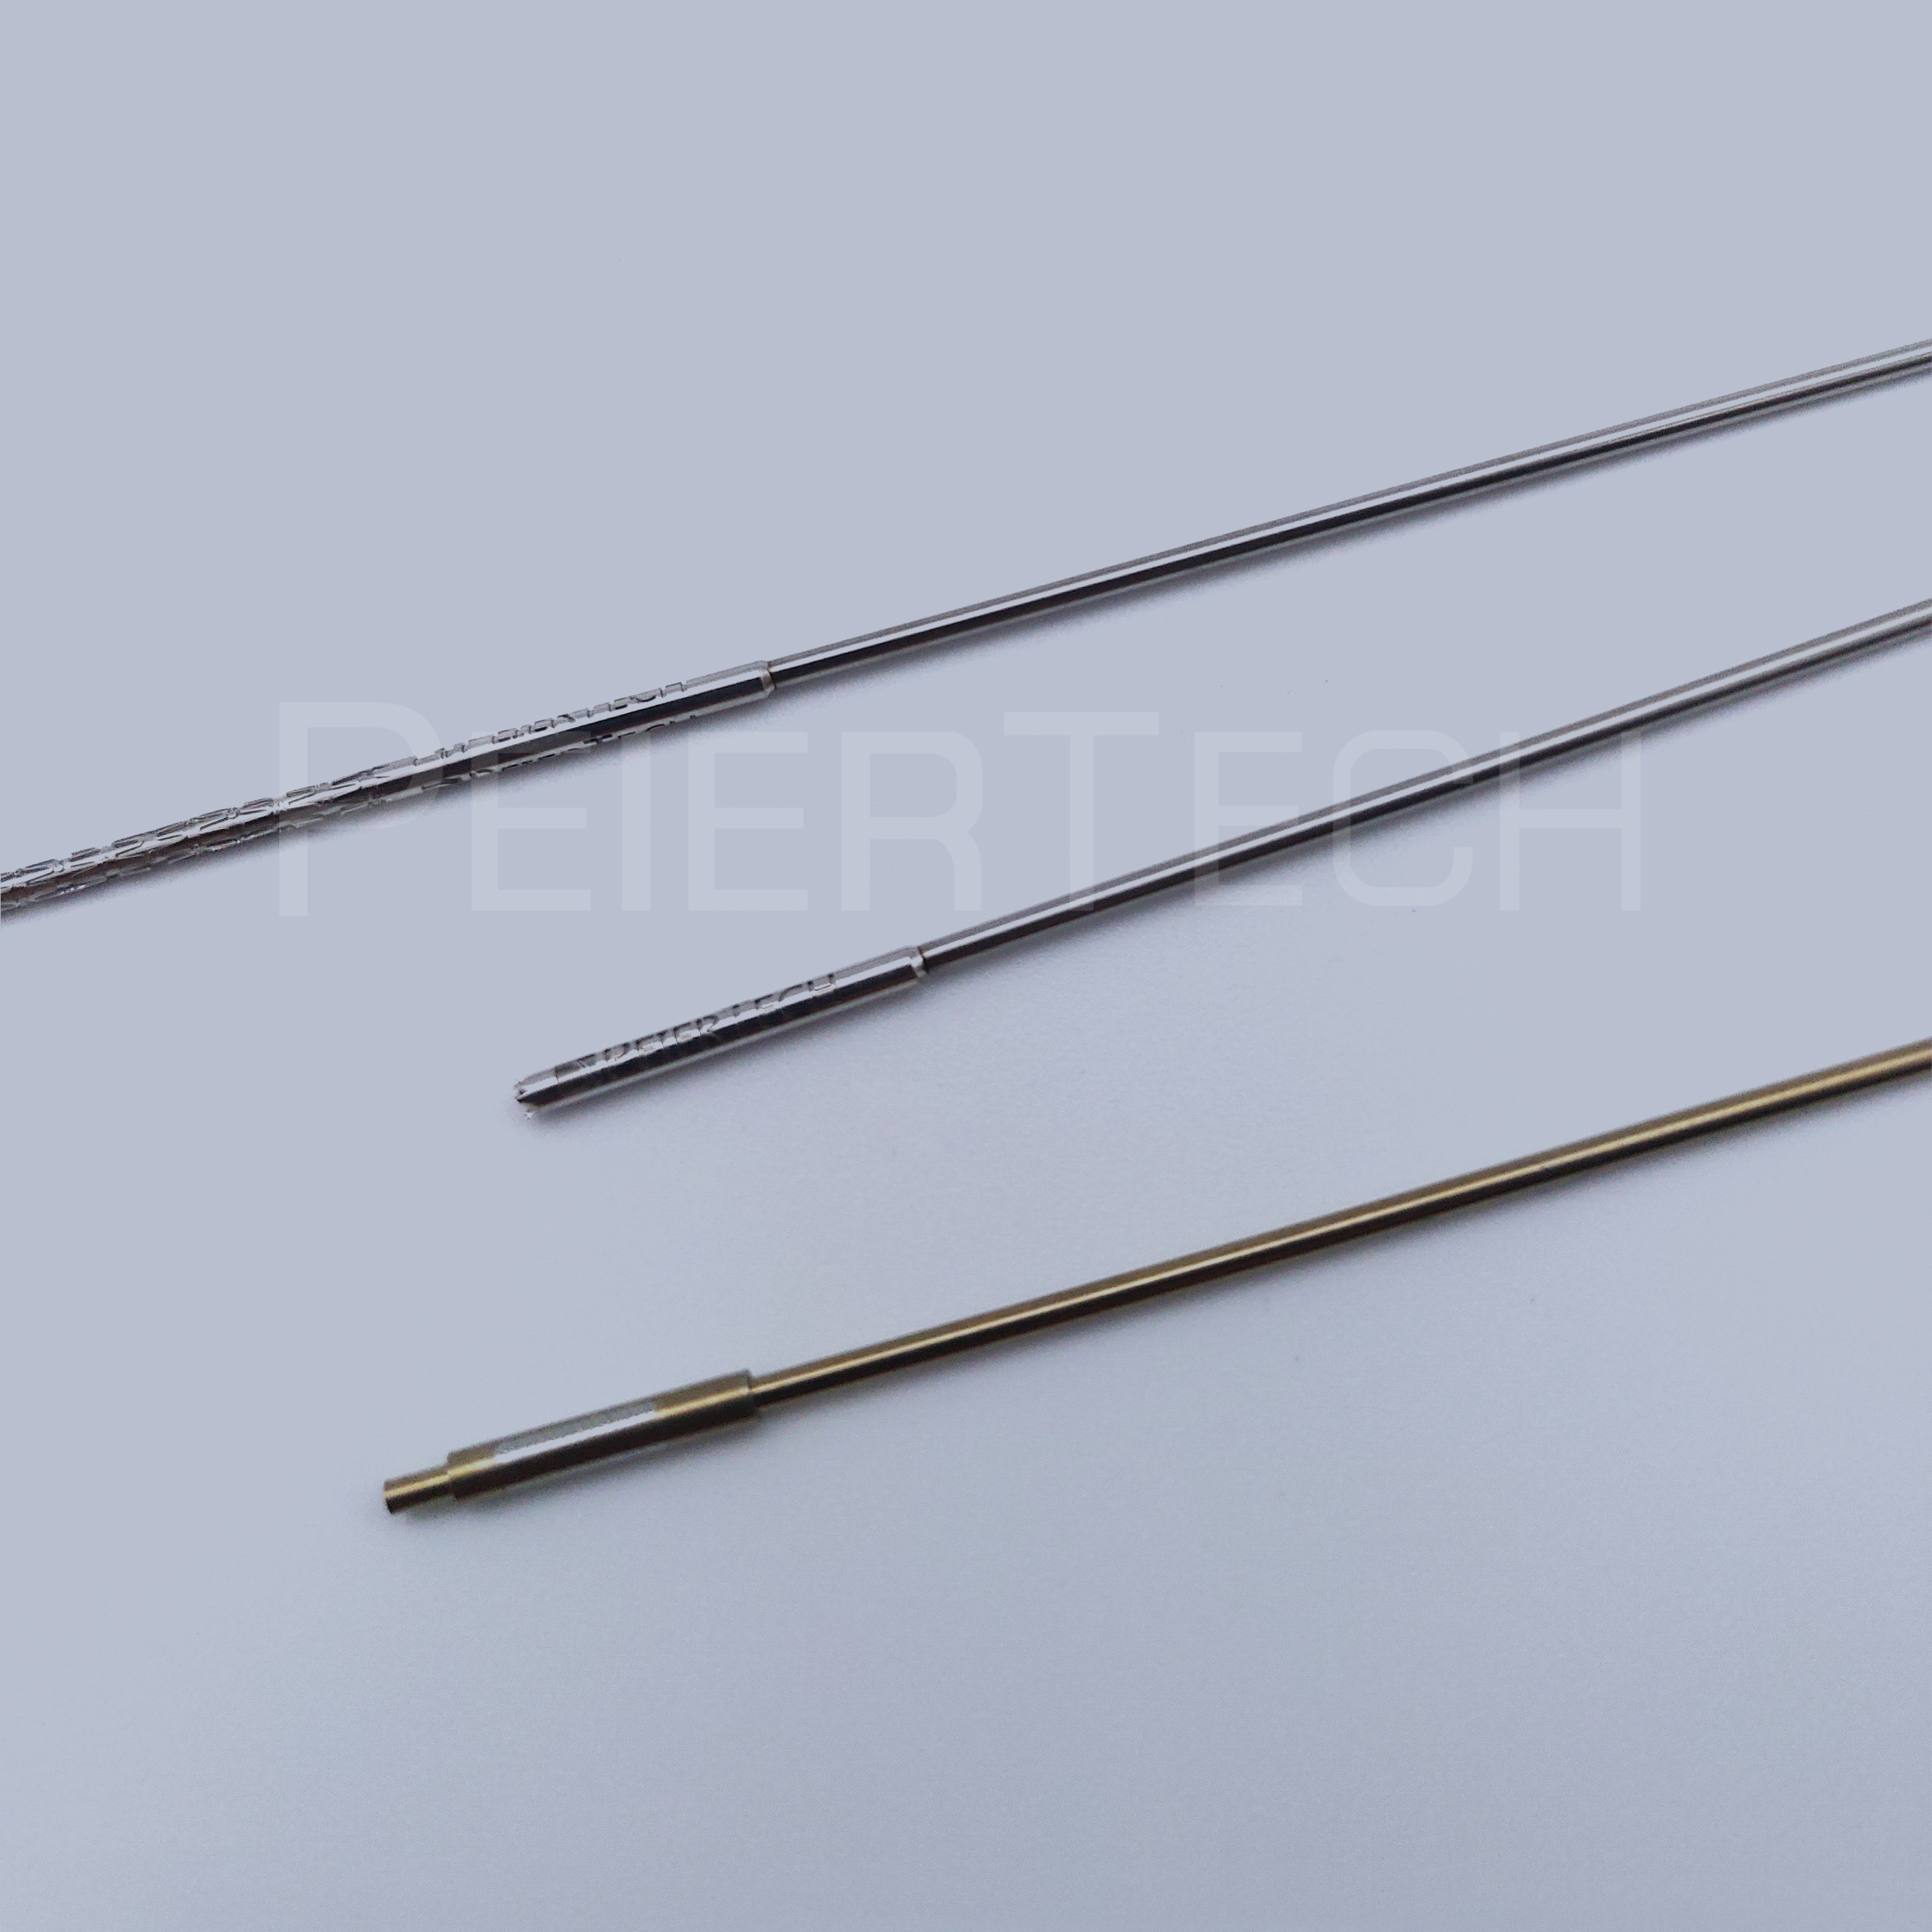 Nitinol Welding Nitinol Component We Do It All With Nitinol Proven High-Volume Performance, helps Customers reduce time to market.